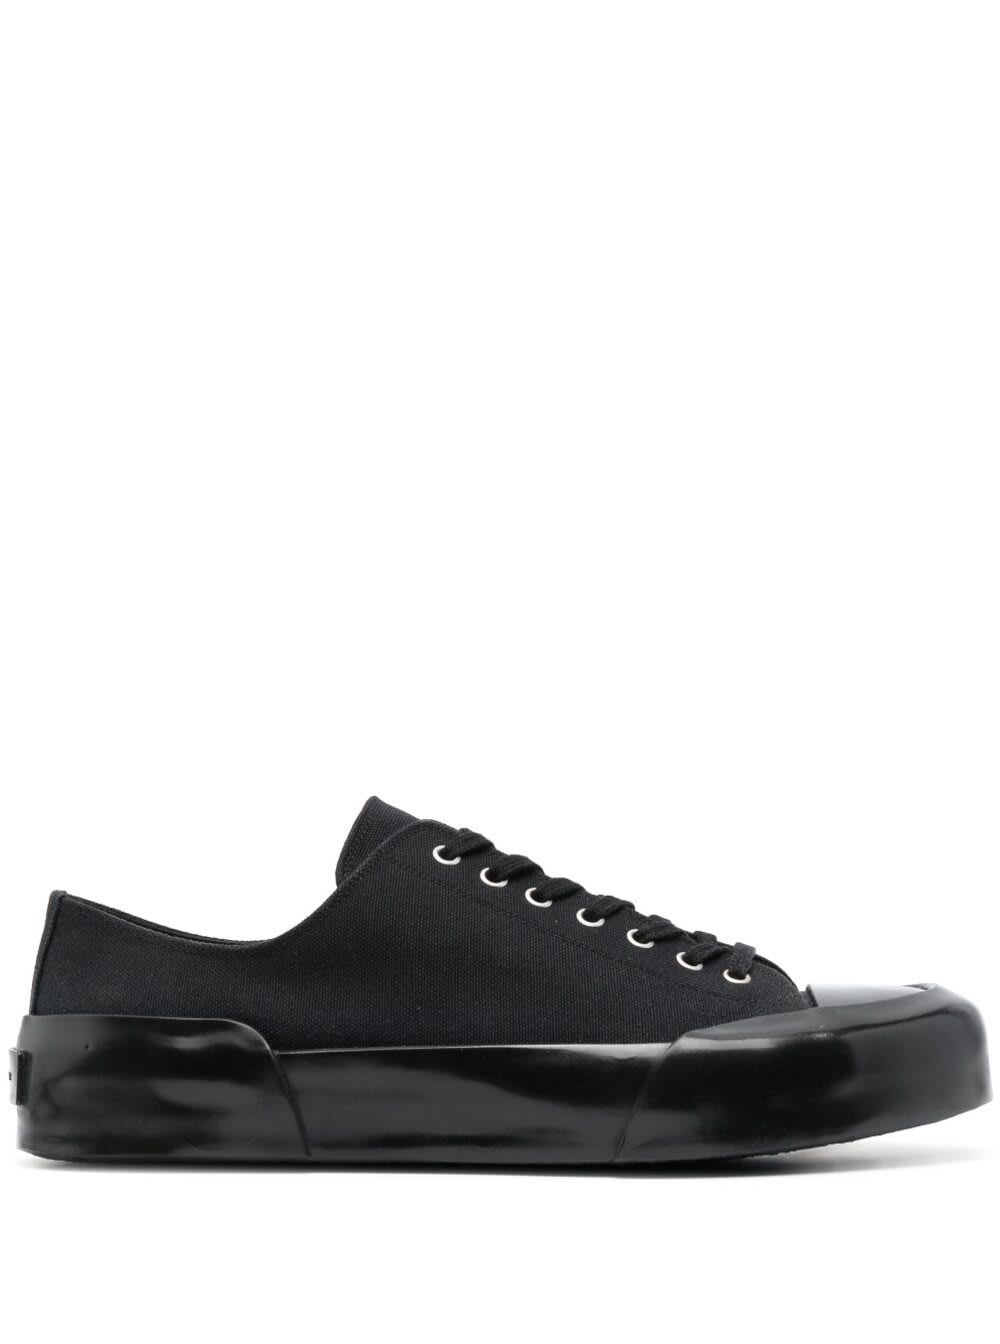 Black Lace-up Low Top Sneakers In Canvas Man